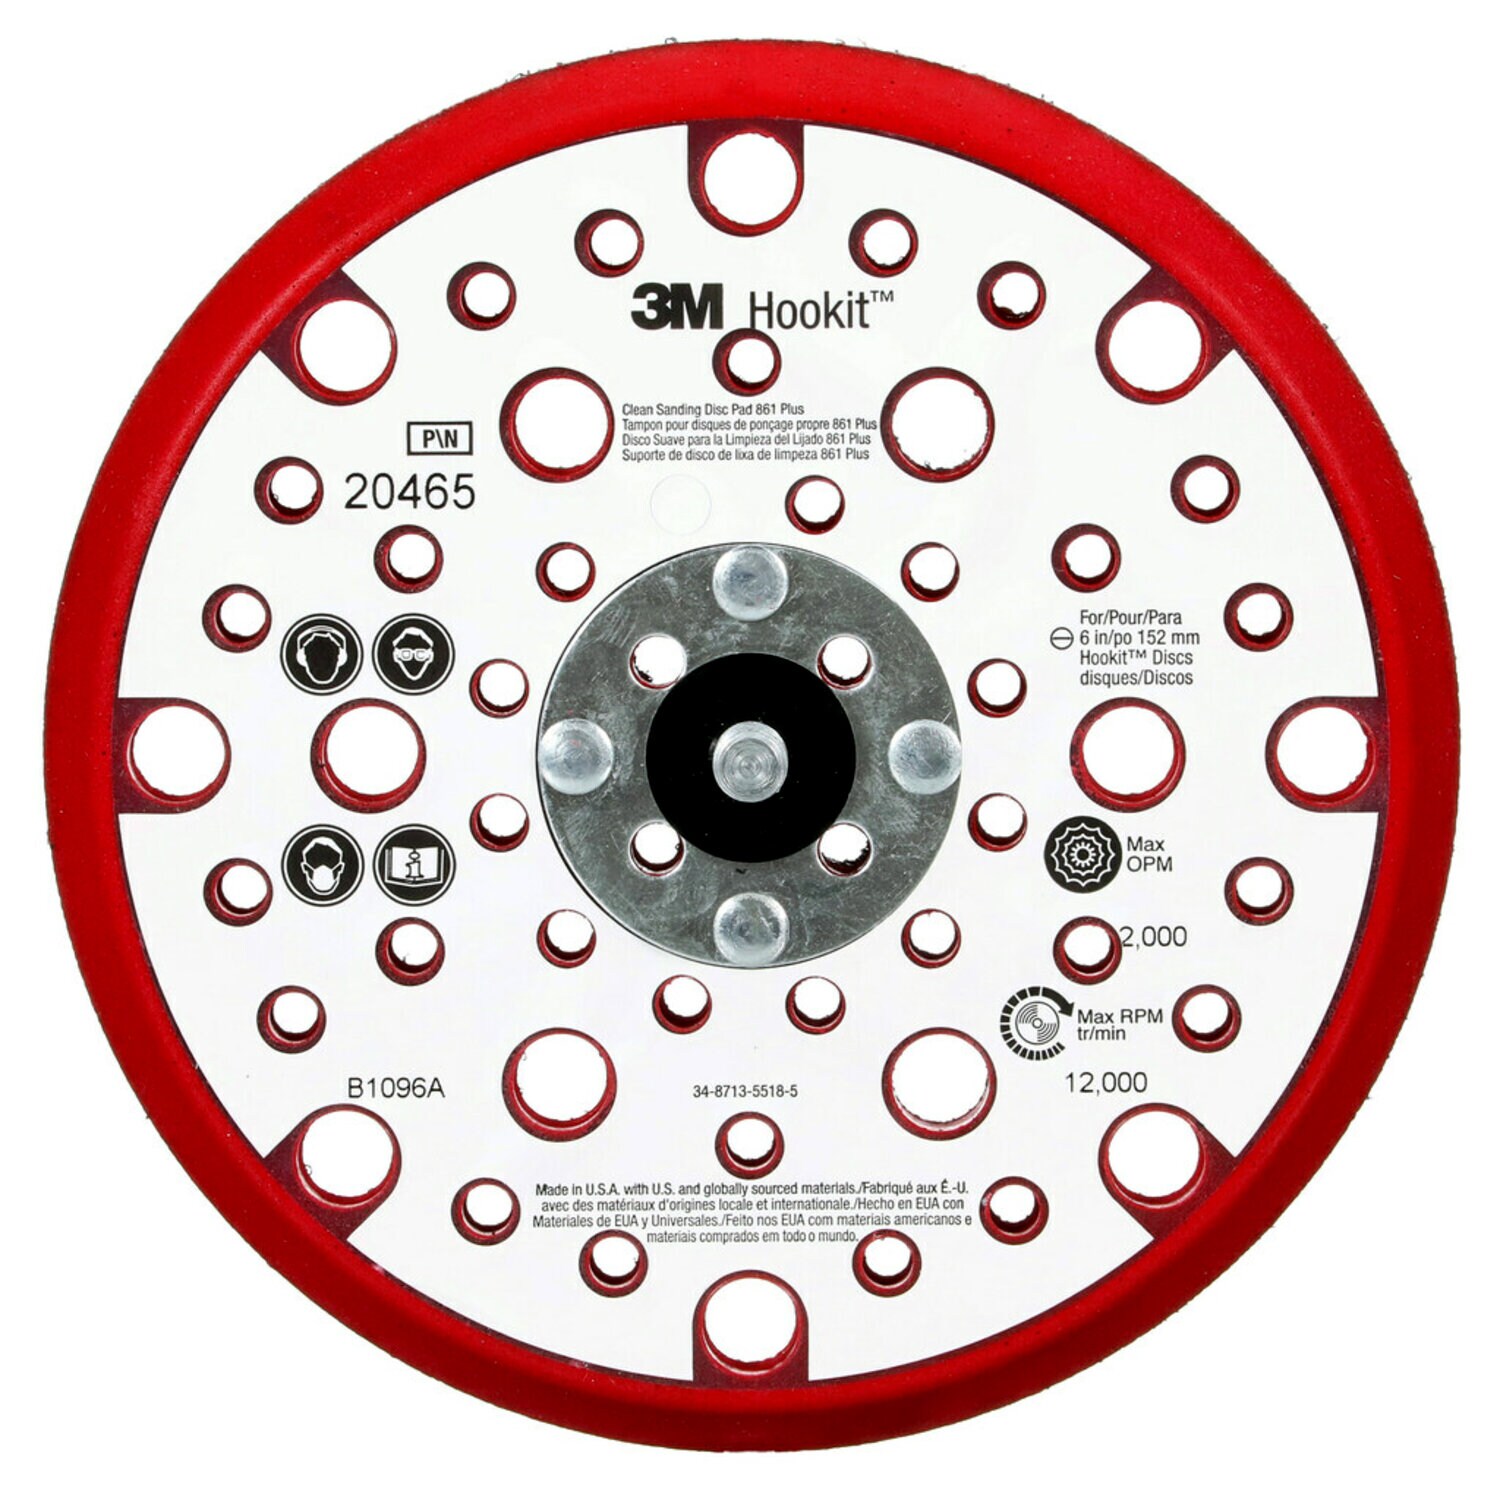 7100022038 - 3M Xtract Low Profile Back-up Pad, 20465, 152 mm x 9.52 mm x 15.8 mm,
External 53 Holes Red Foam, 10 ea/Case